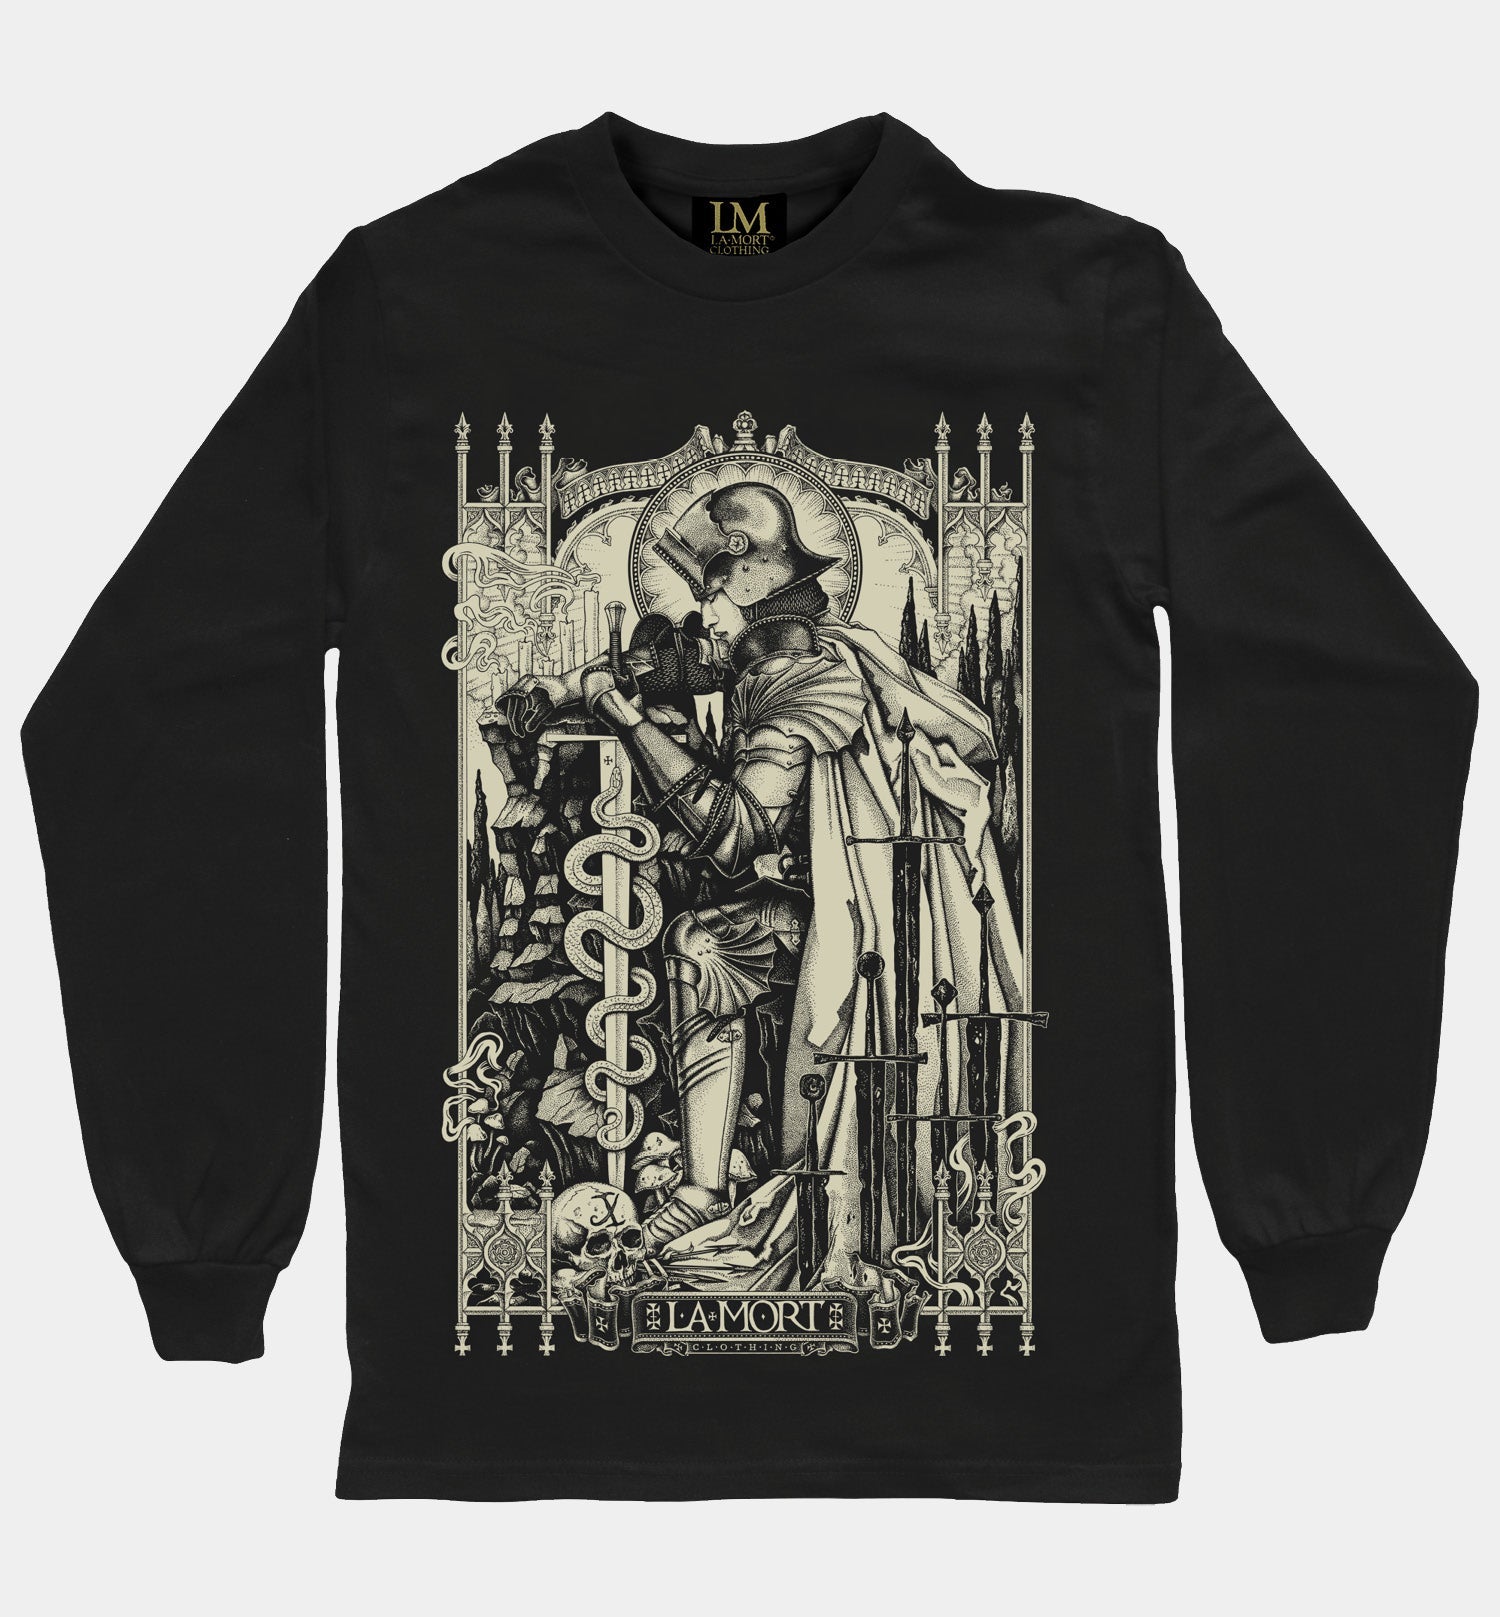 The Beguiling Long Sleeve T-shirt (BW/B)